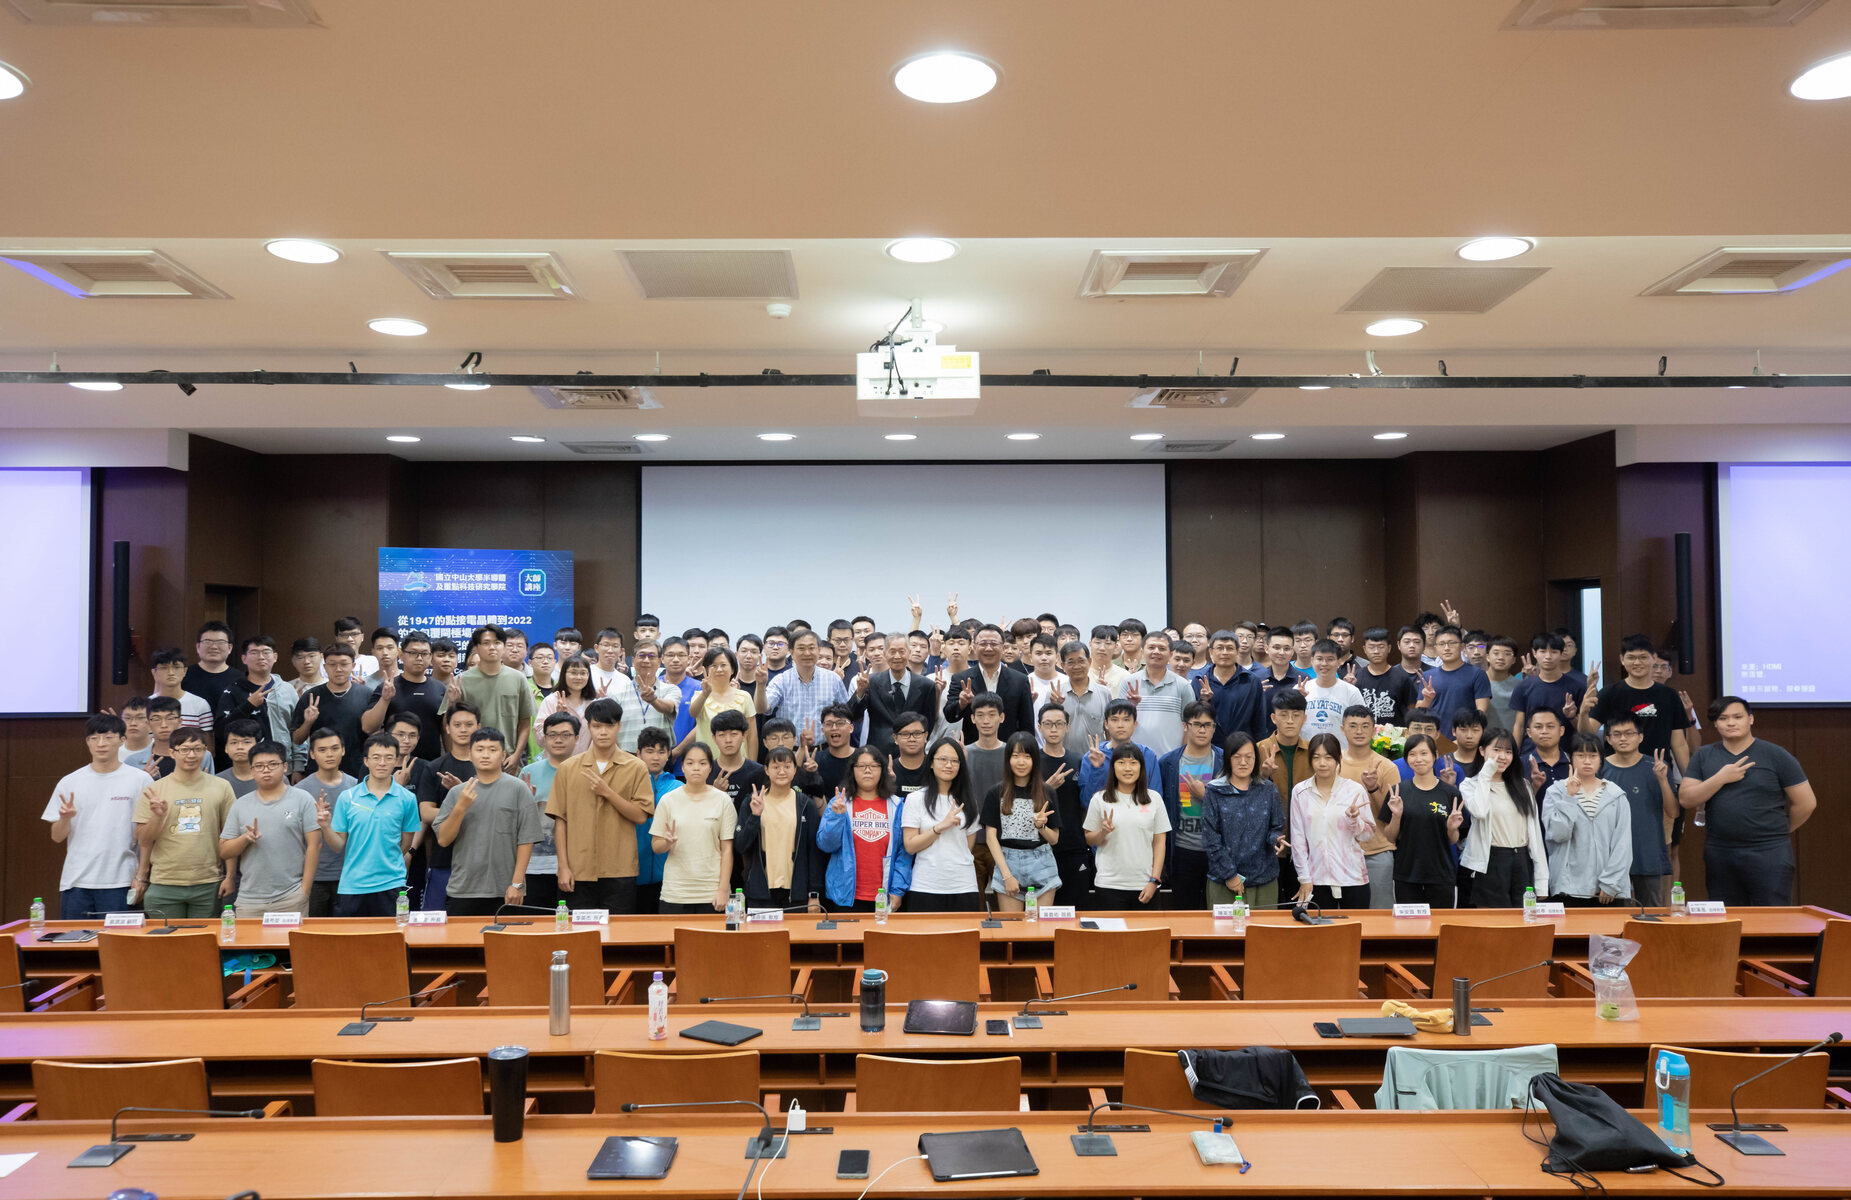 The Semiconductor Lecture of the NSYSU College of Semiconductor and Advanced Technology Research